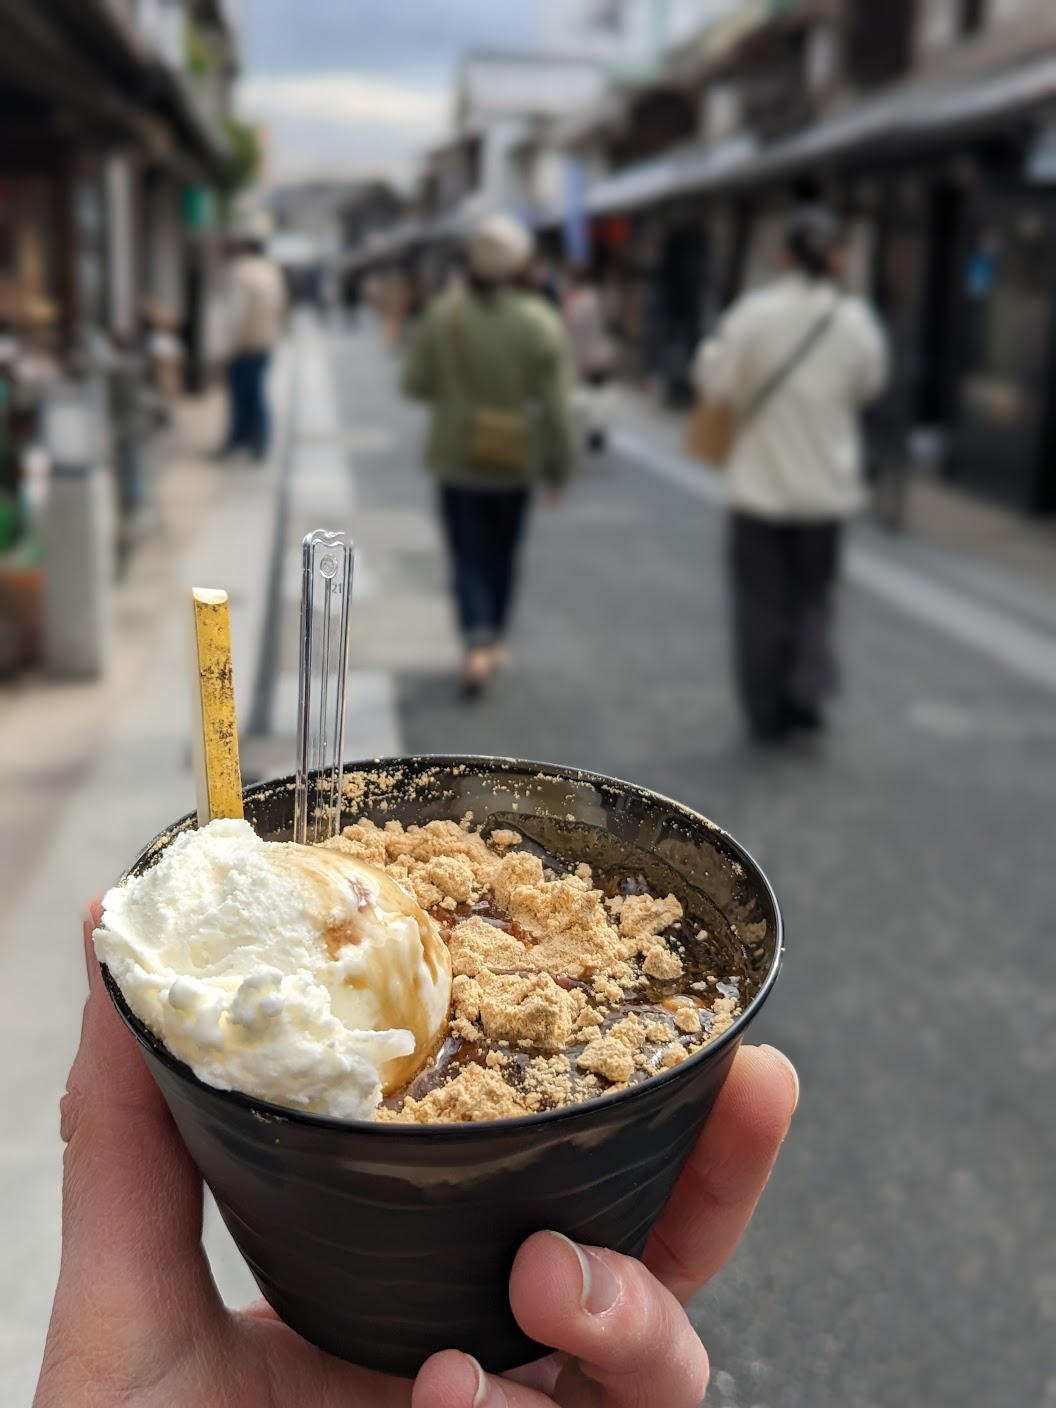 Recommendations and Reflections from a New Yorker's First Time in Japan